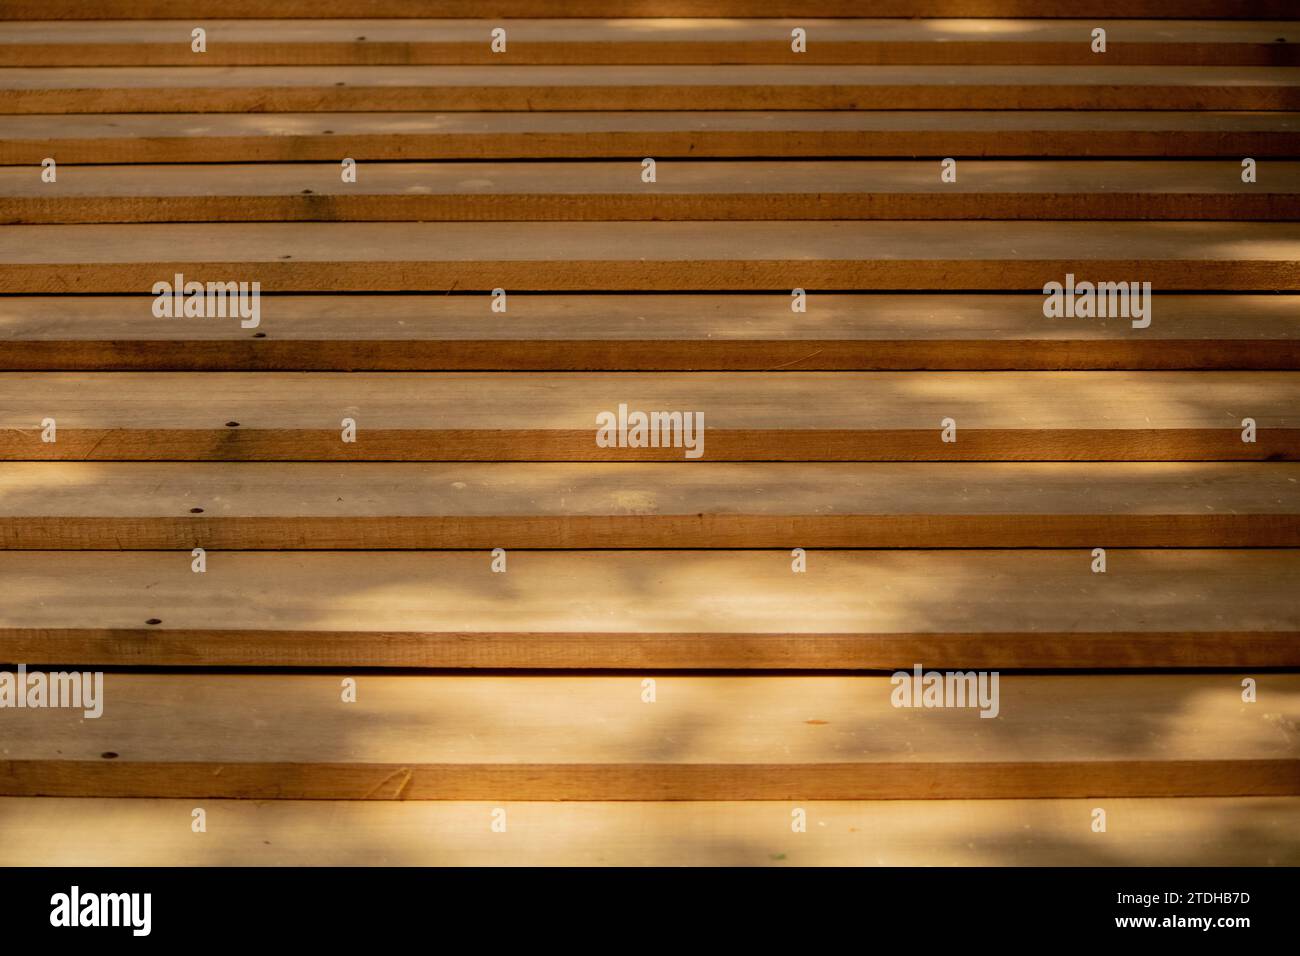 Abstract symphony of wooden planks, gracefully arranged in staggered harmony, painted by the gentle shadows cast by overhead foliage—a visual poetry. Stock Photo